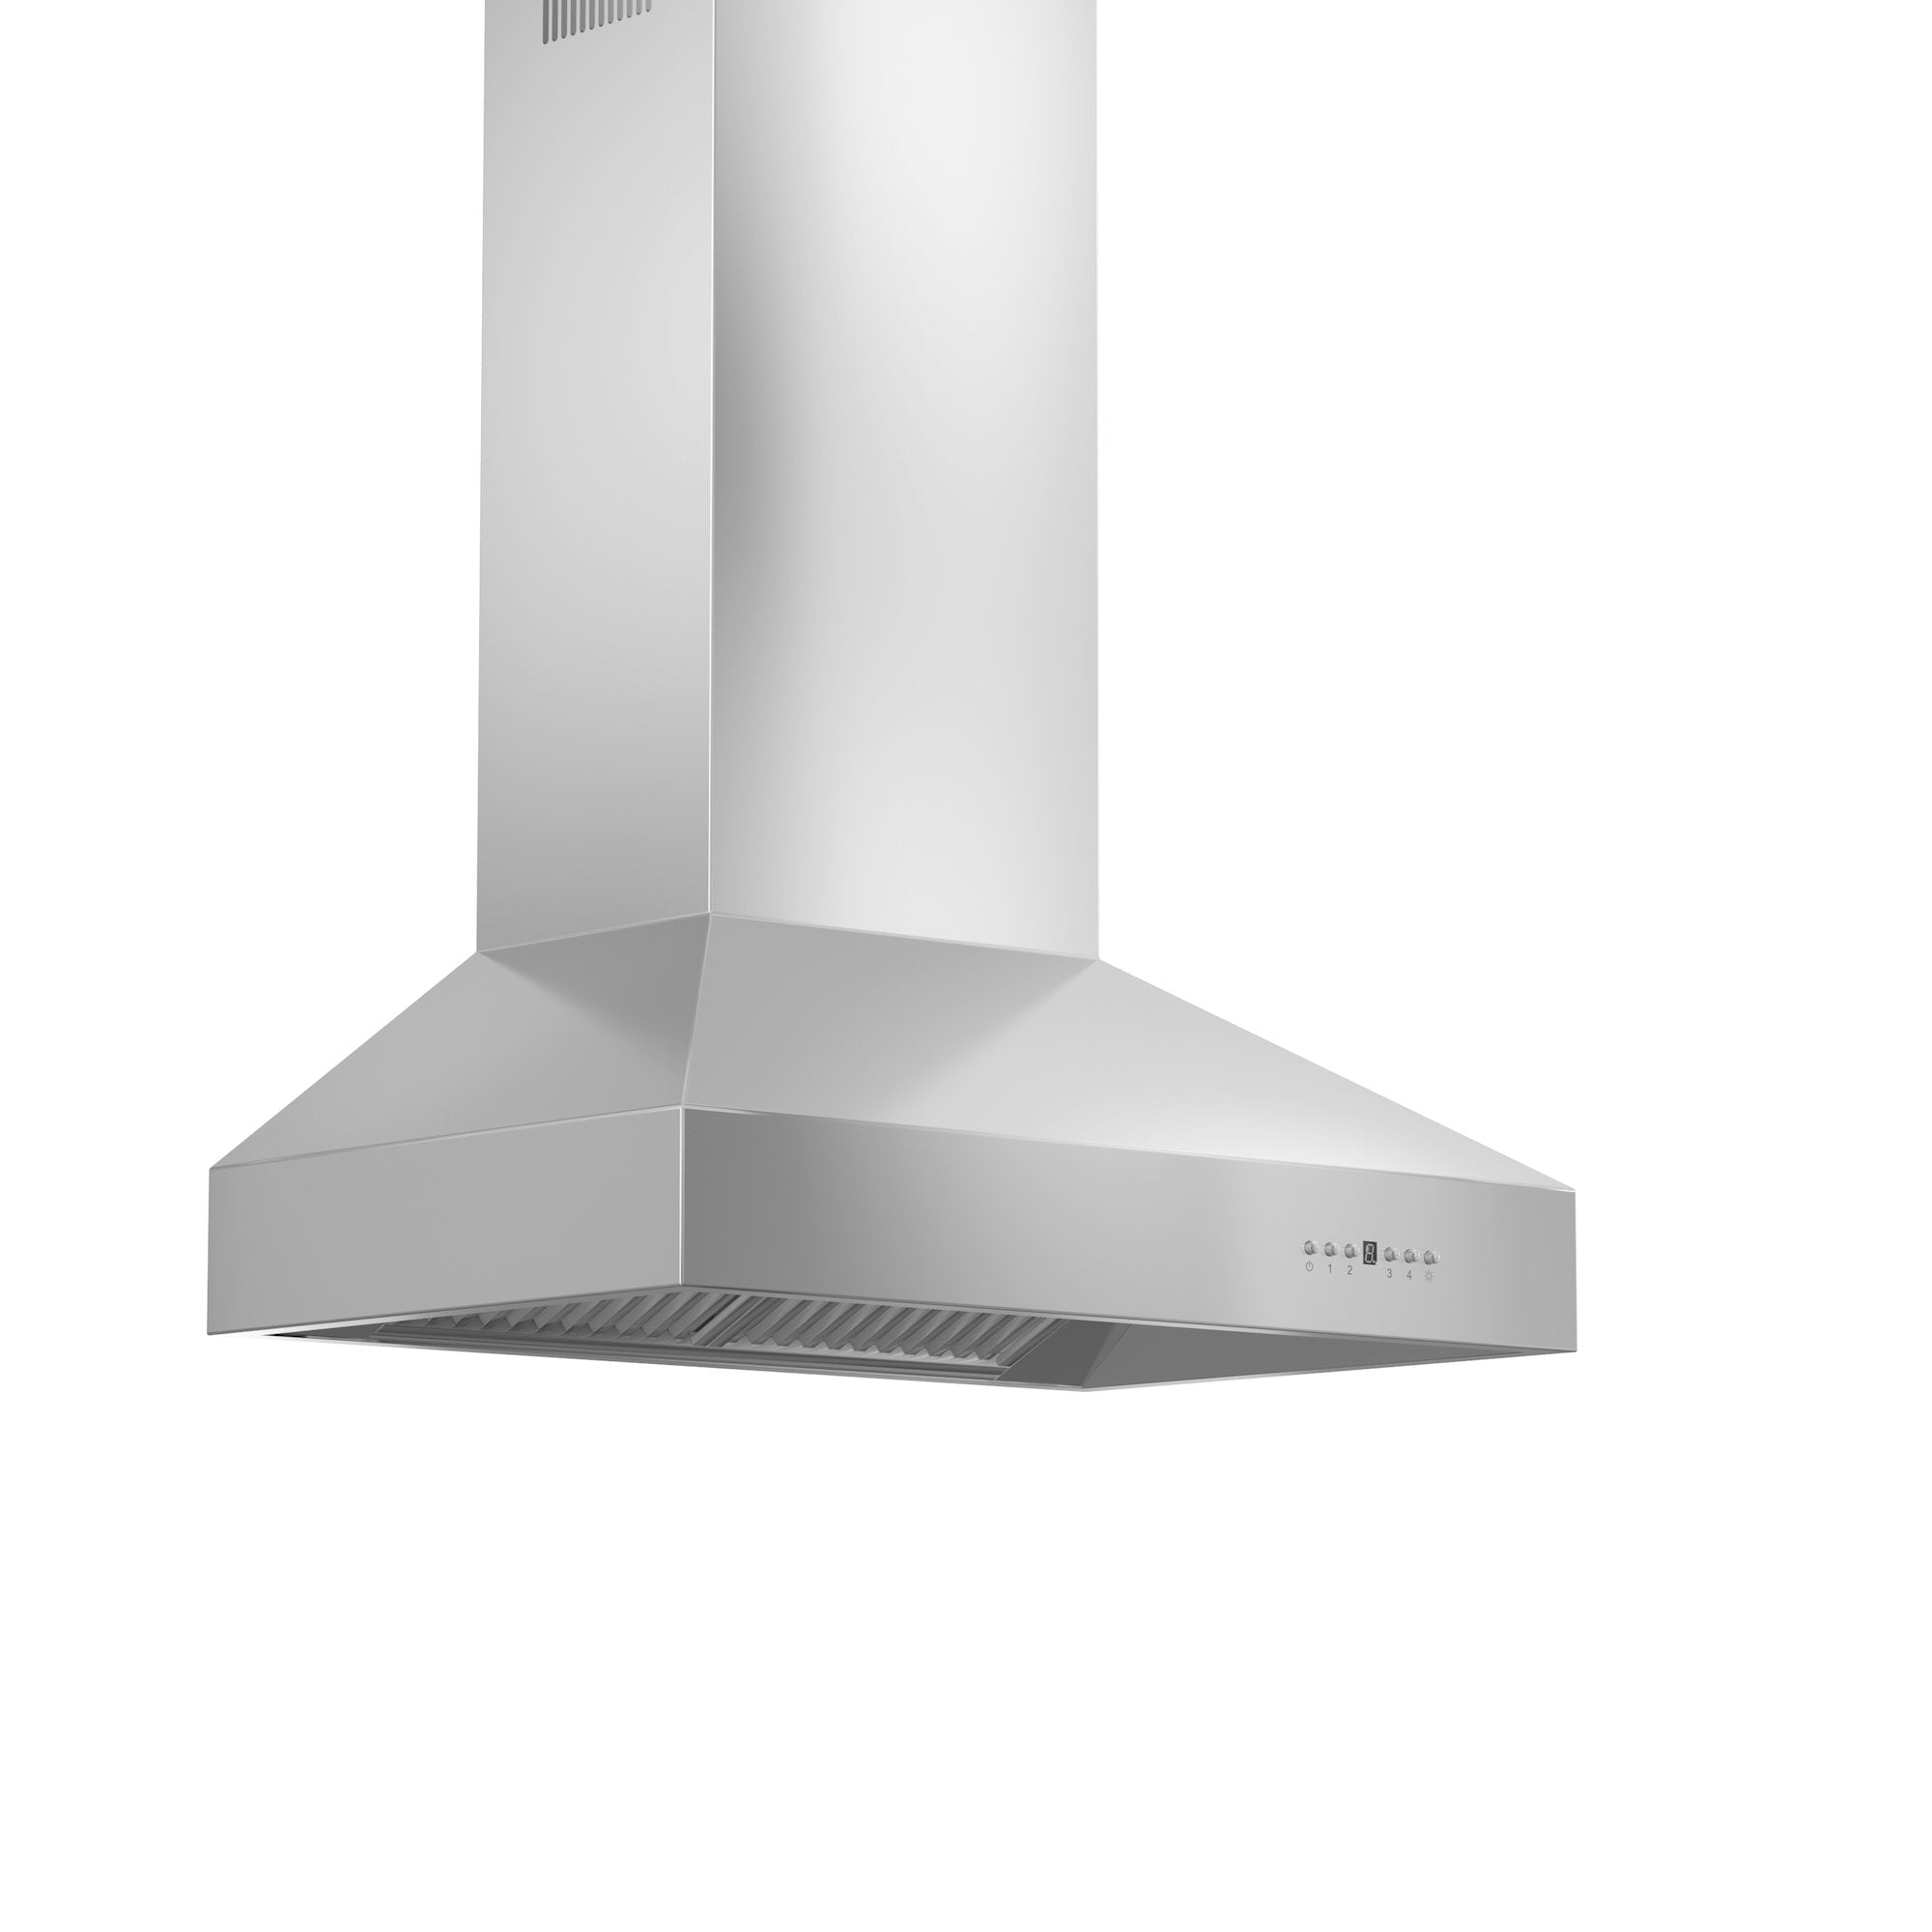 ZLINE 42" Outdoor Ducted Wall Mount Range Hood in Outdoor Approved Stainless Steel (667-304-42)